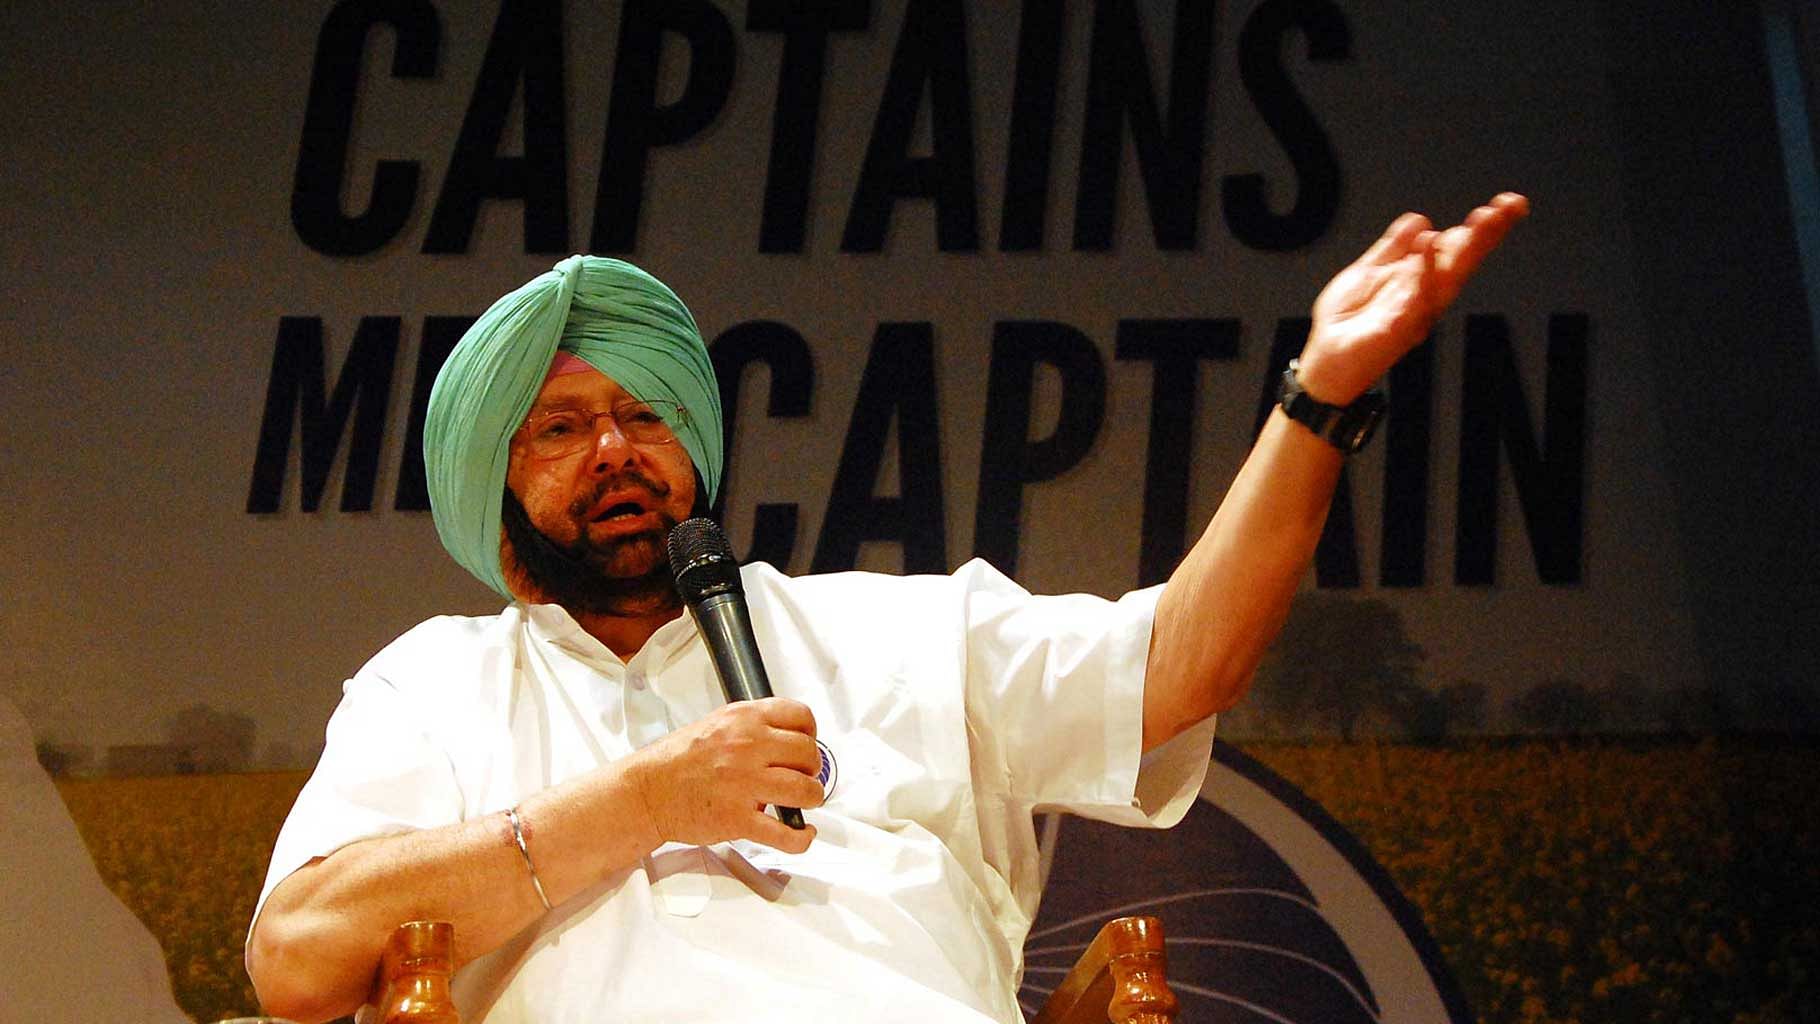 Congress member Captain Amrinder Singh at the event in Chandigarh on Sunday, 29 May 2016. (Photo Courtesy: IPAC)